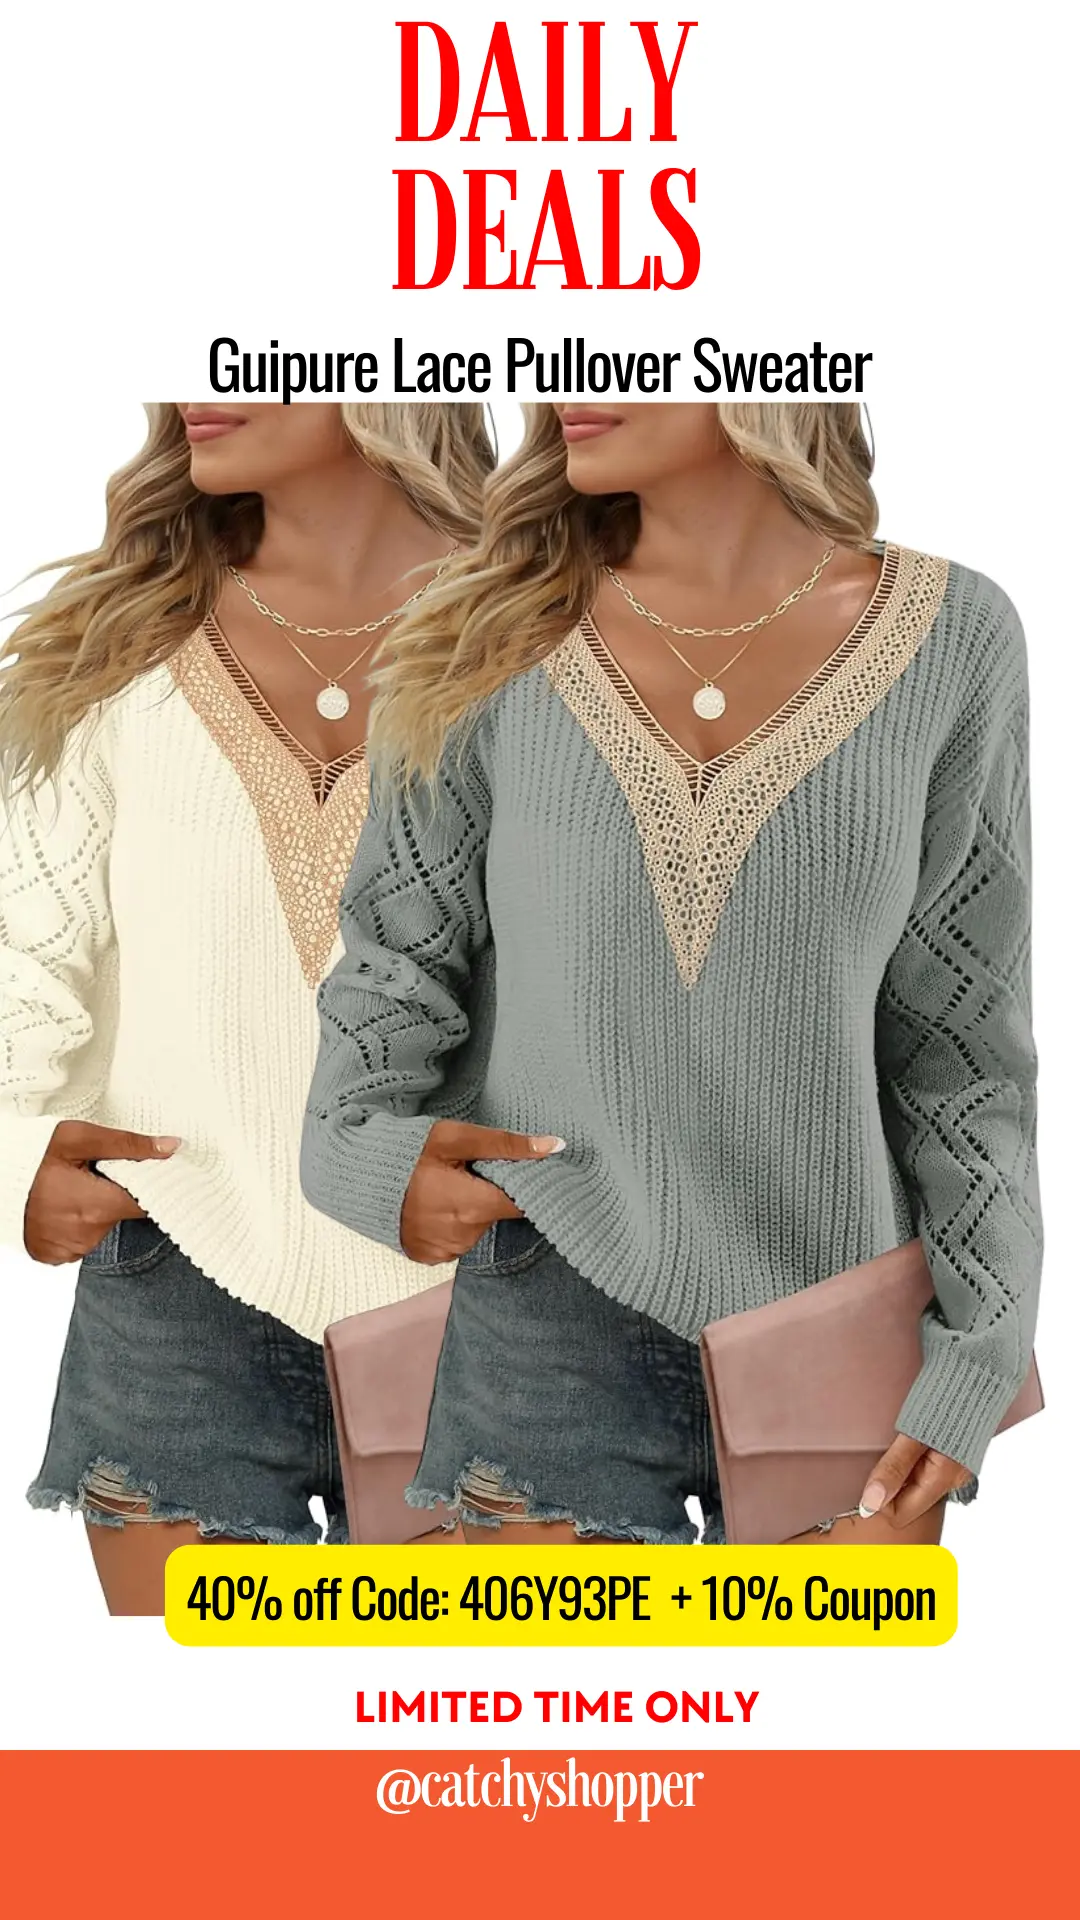 Guipure Lace Pullover Sweater